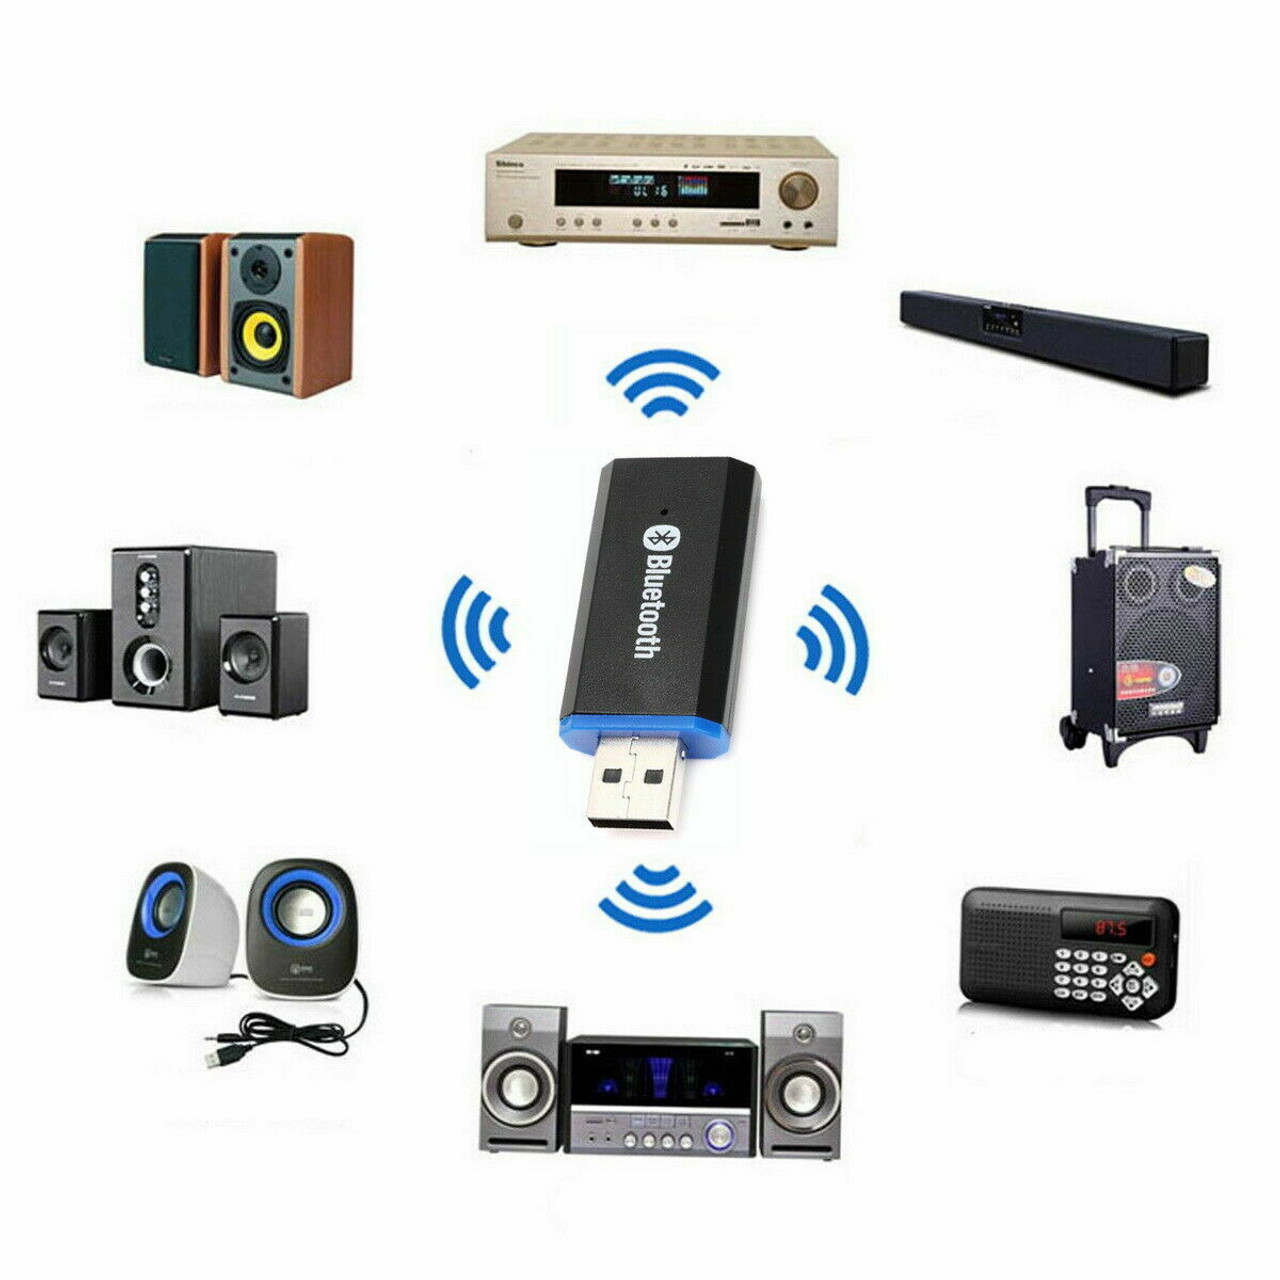 USB Bluetooth 5.0 Receiver Adapter 3.5mm Jack AUX Stereo For Headphone Speaker